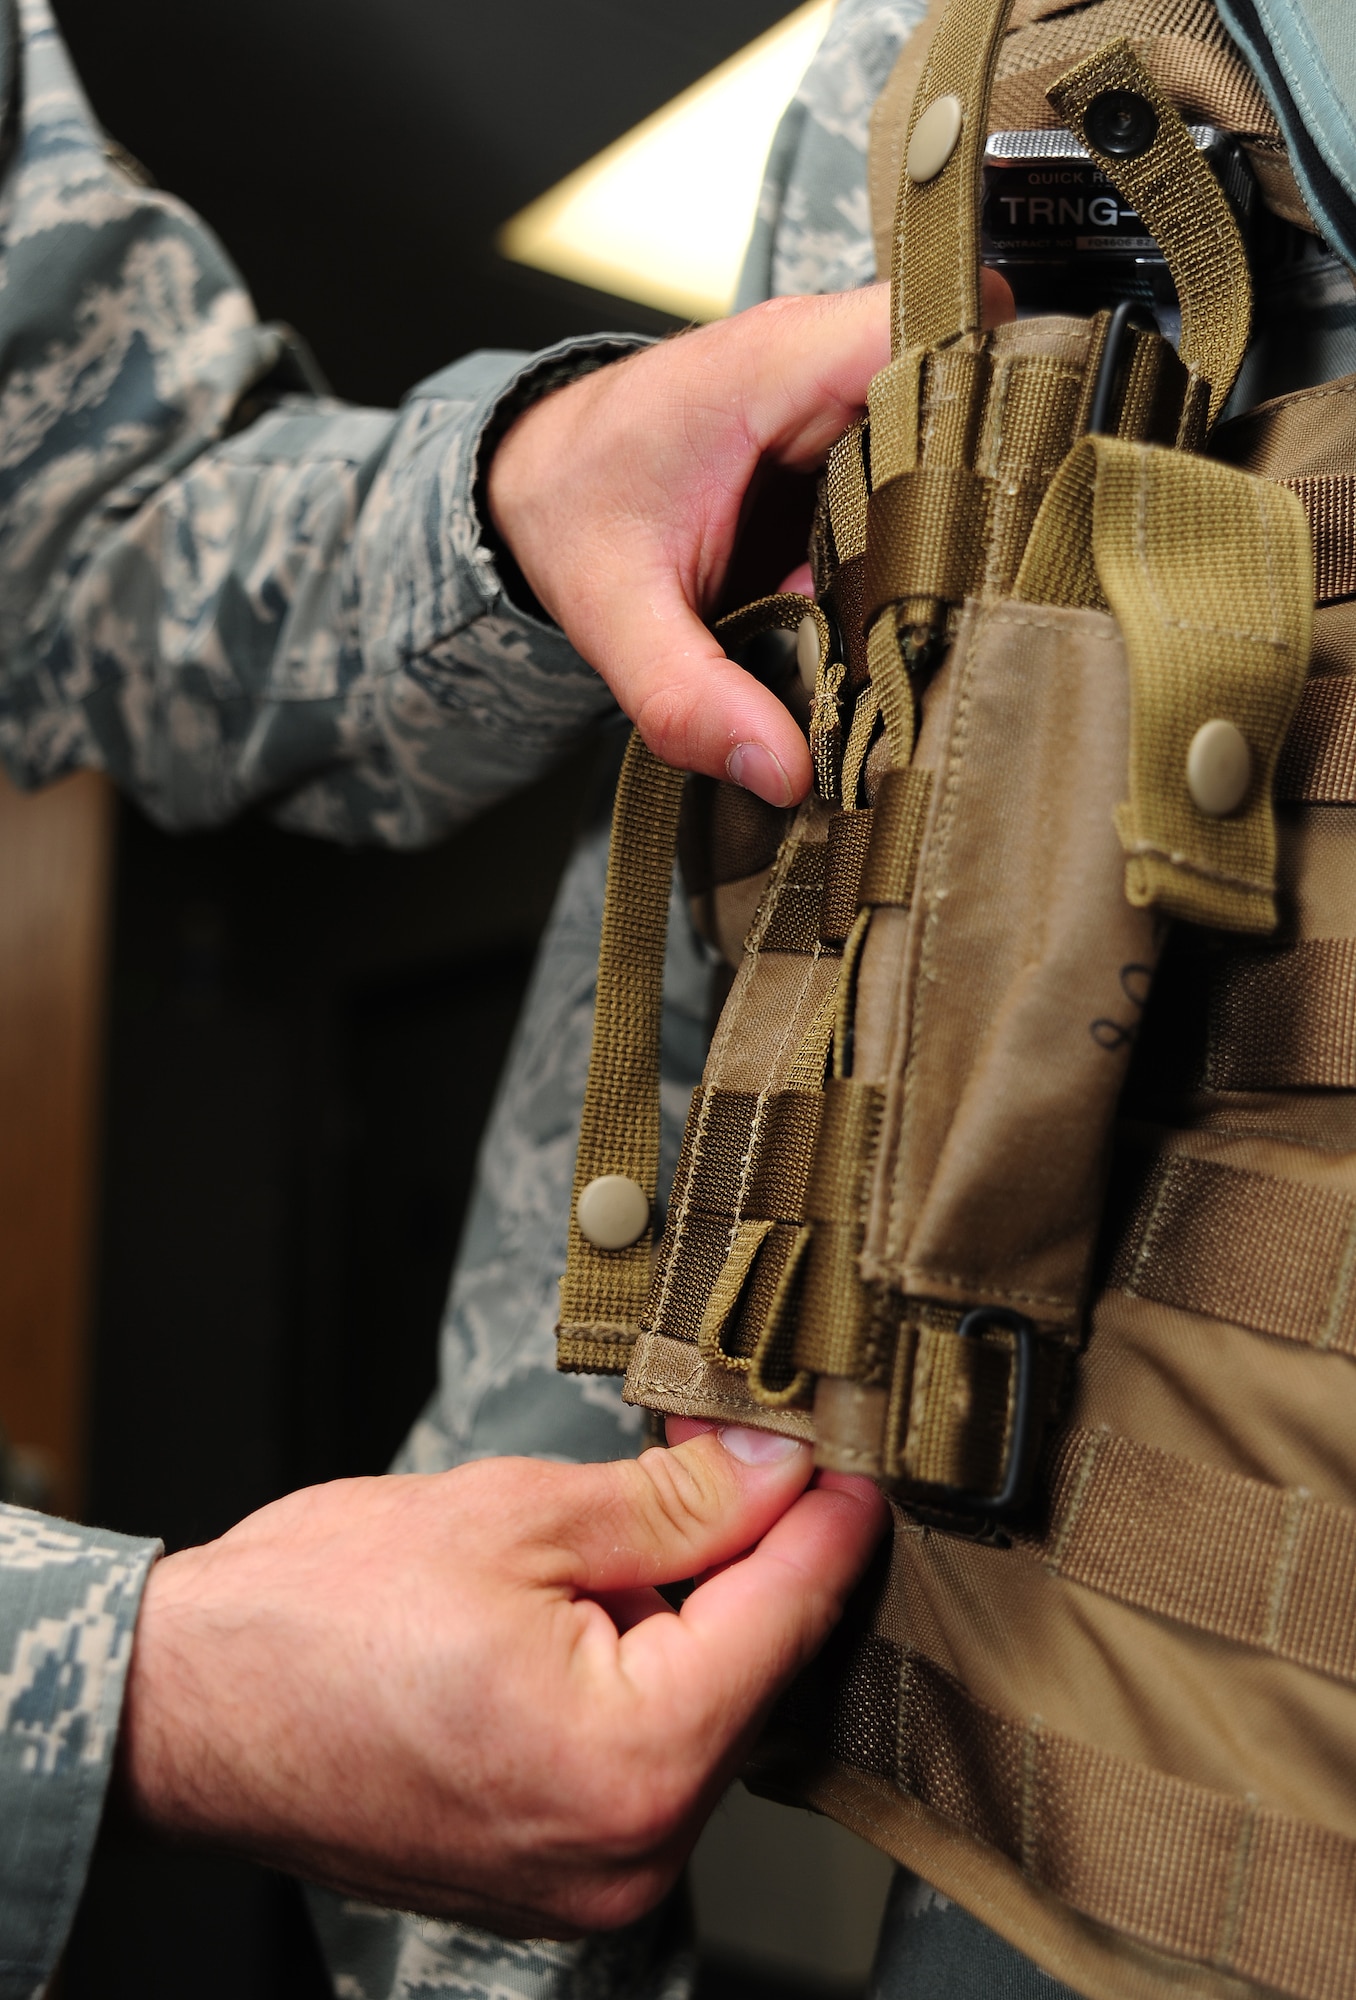 Senior Airman Ethan Mason, 509th Operations Support Squadron aircrew flight equipment journeyman, readjusts the location of an M9 holster on an Airsave vest at Whiteman Air Force Base, Mo., July 16, 2013. Pilots carry M9 as a first line of defense against insurgents, terrorists and other potential threats on the ground. (U.S. Air Force photo by Staff Sgt. Nick Wilson/Released) 